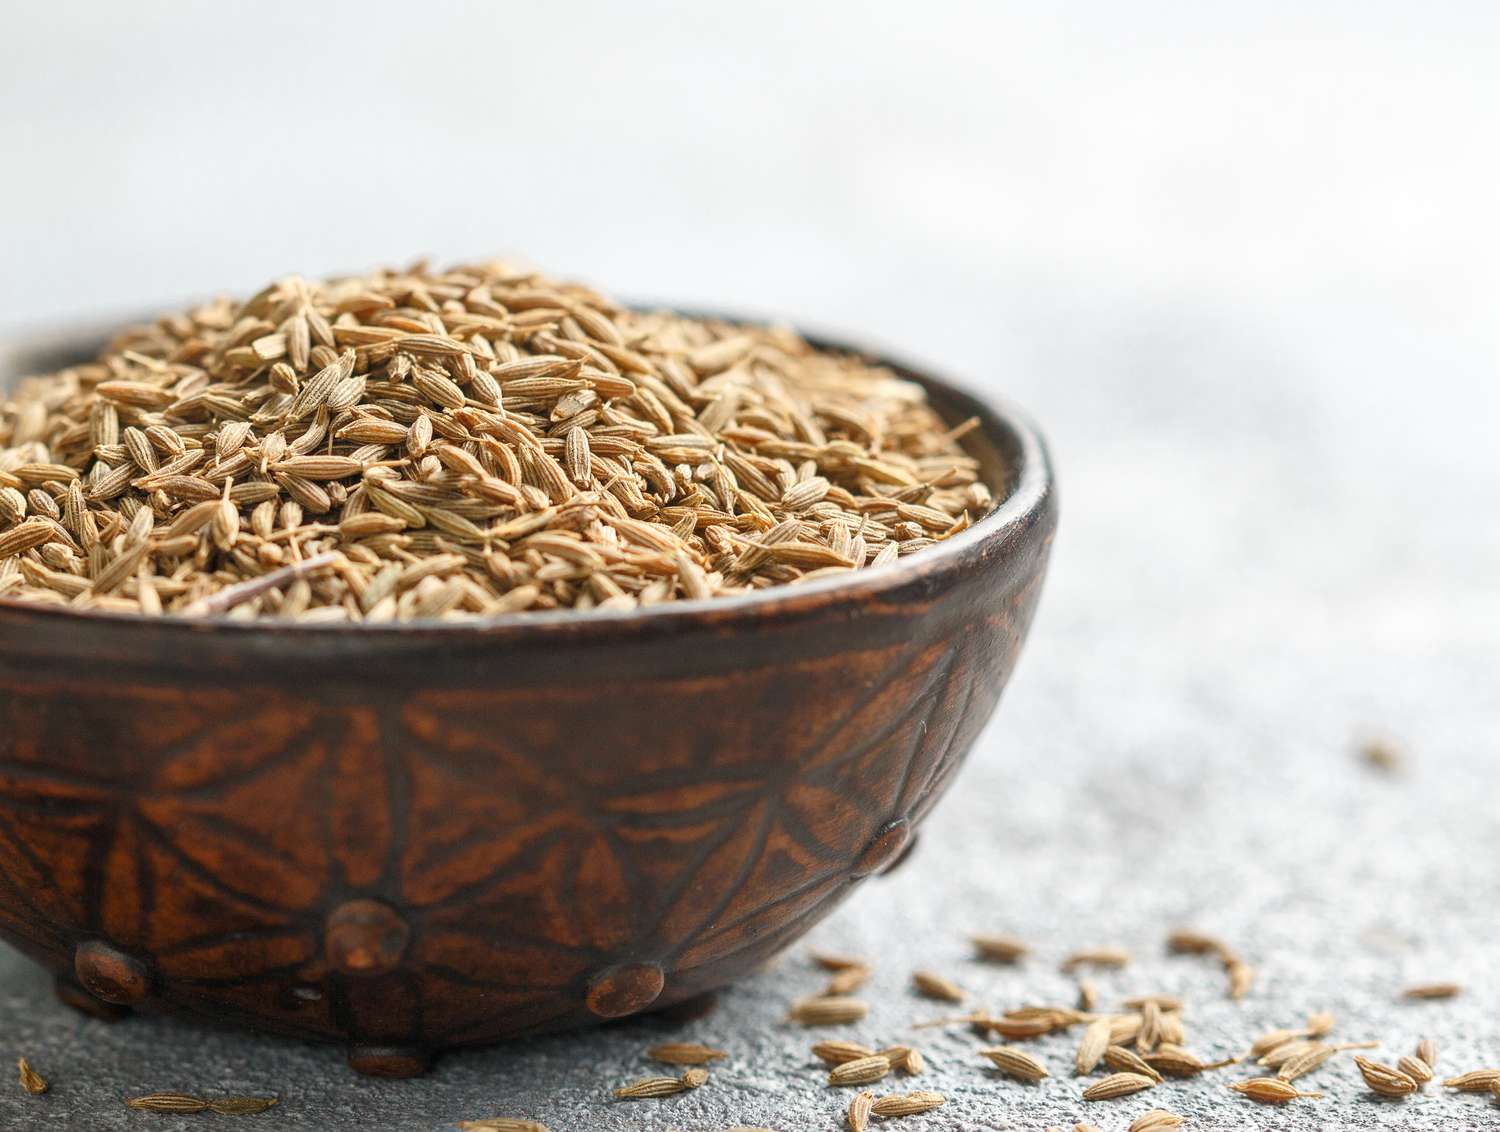 Cumin Seeds Provide Benefits for Both Men and Women